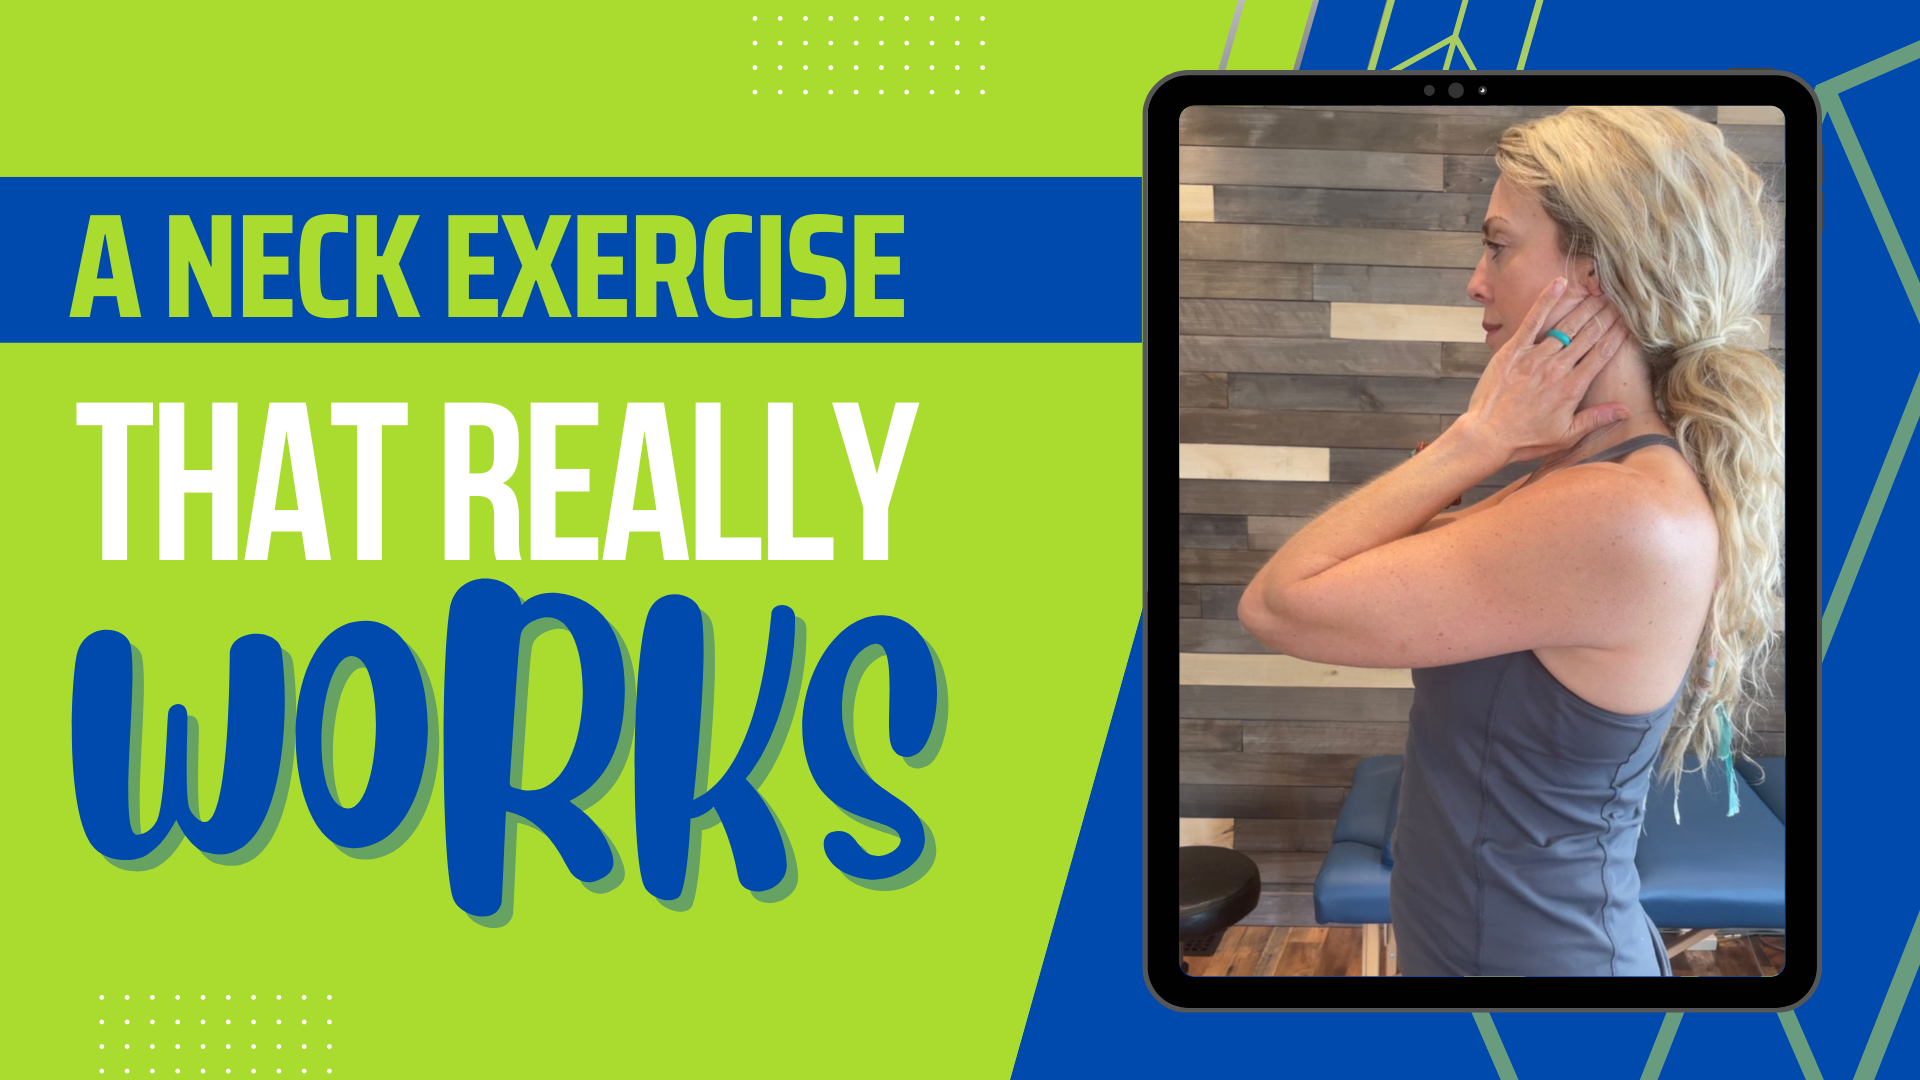 A neck exercise that really works